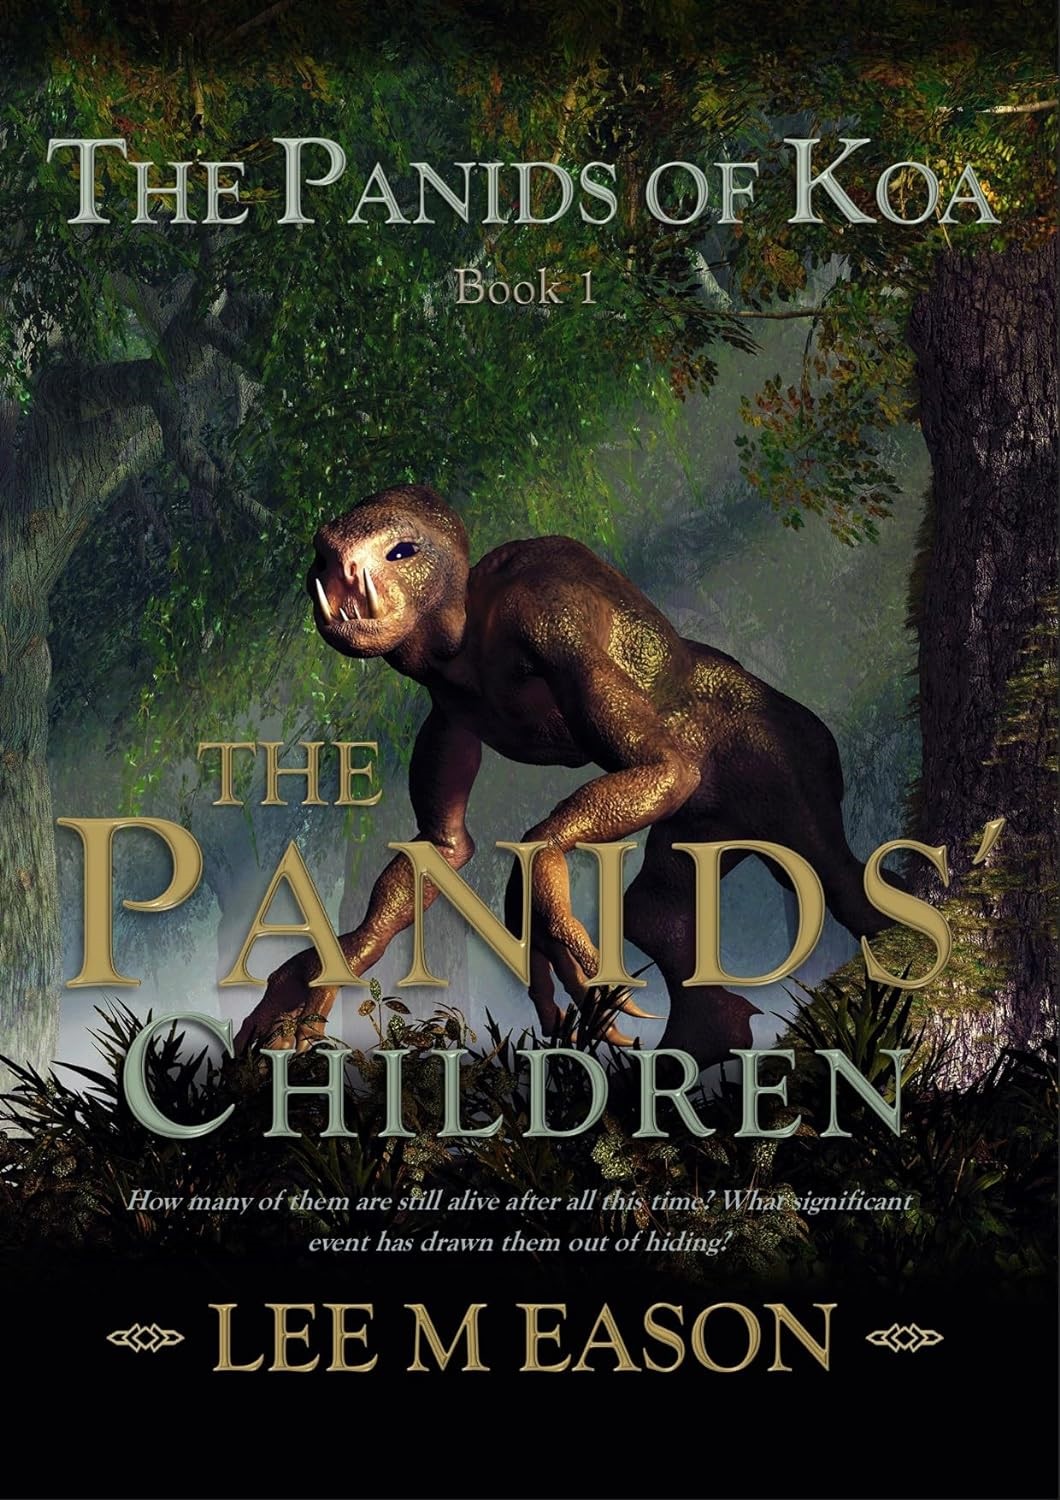 Lee M Eason's "The Panids' Children" Ignites a New Era of Fantasy with Epic Tales of Magic and Conflict